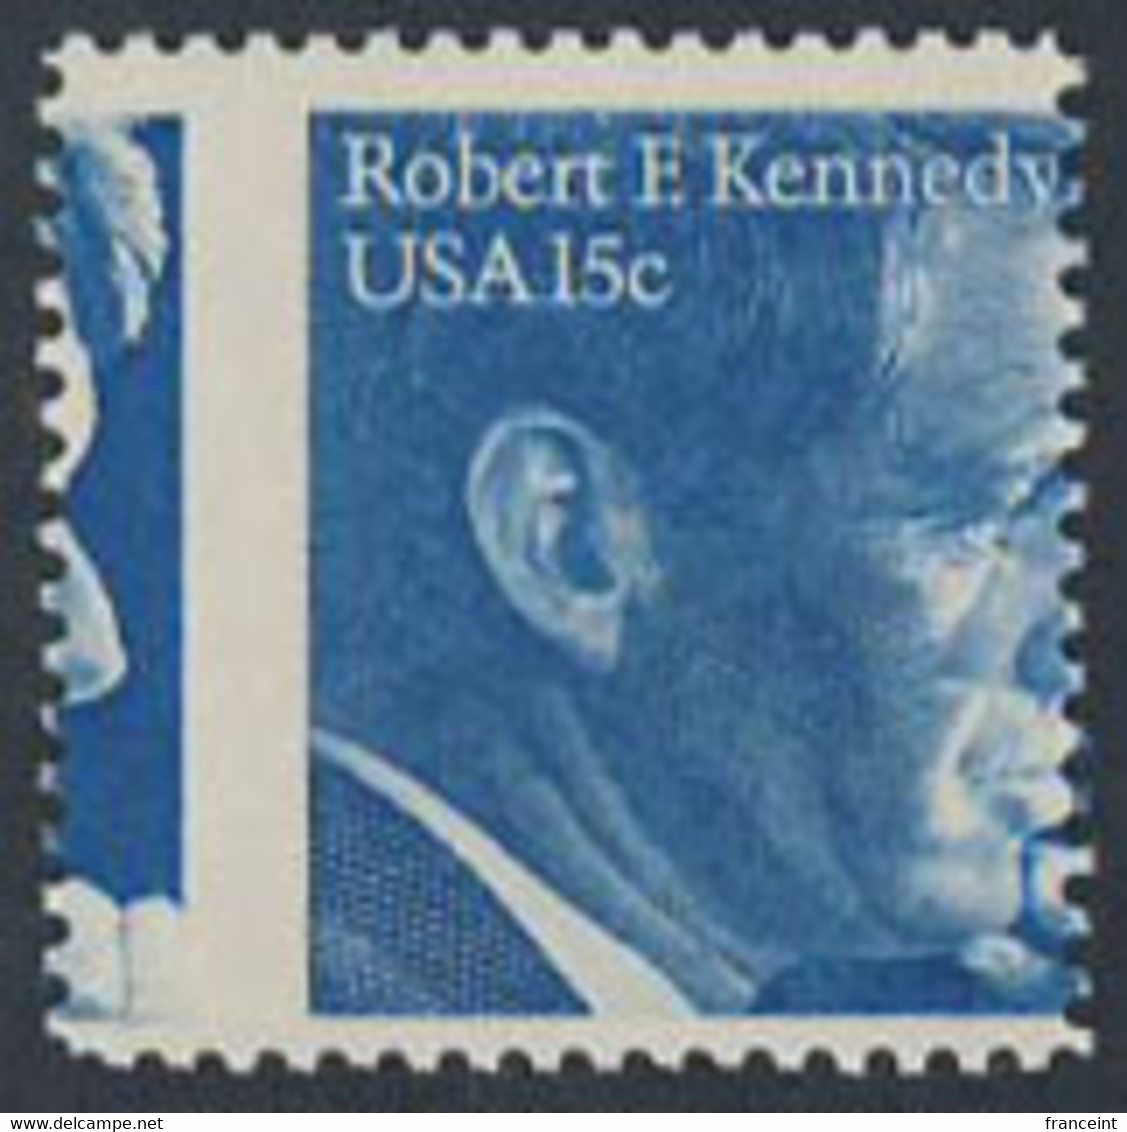 U.S.A. (1979) R. F. Kennedy. Vertical Misperforation Resulting In Kennedy's Nose Appearing On The Left. Scott No 1770 - Errors, Freaks & Oddities (EFOs)